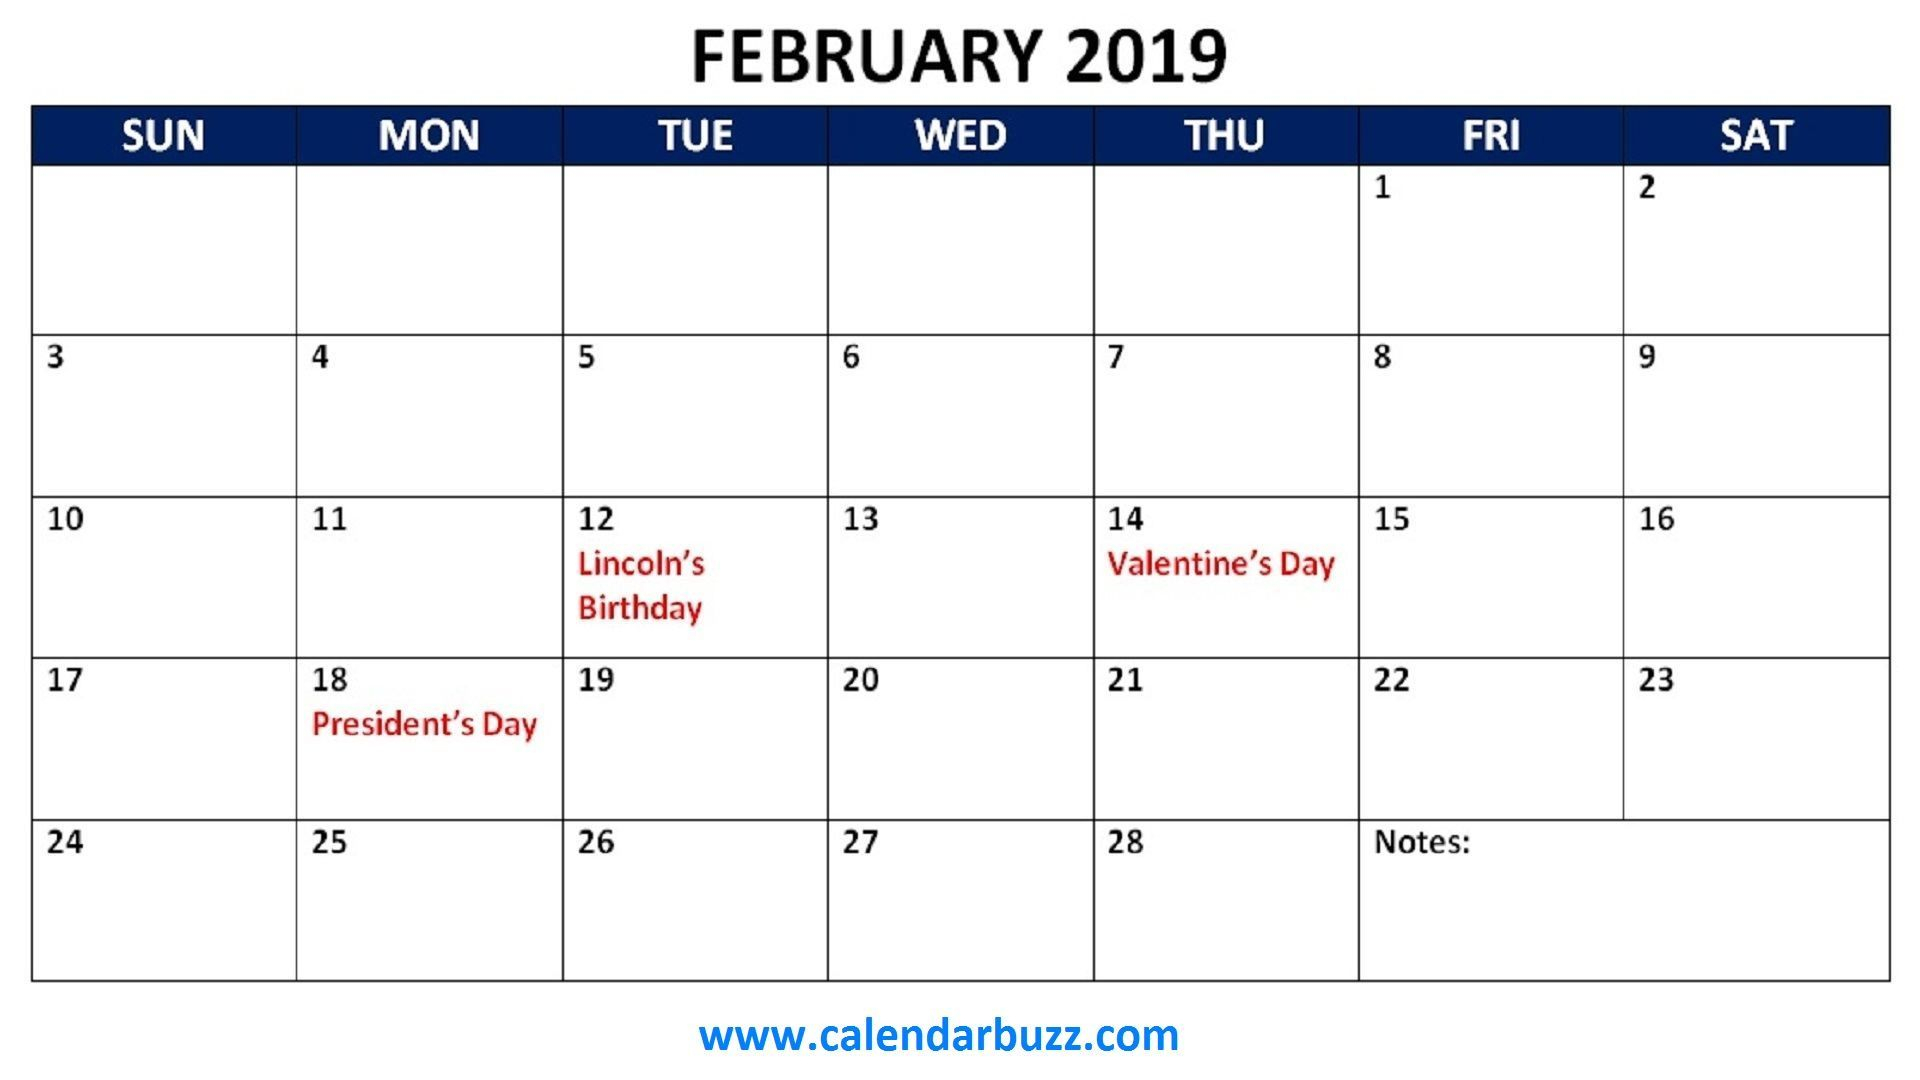 February 2019 Calendar Philippines With Holidays - Free